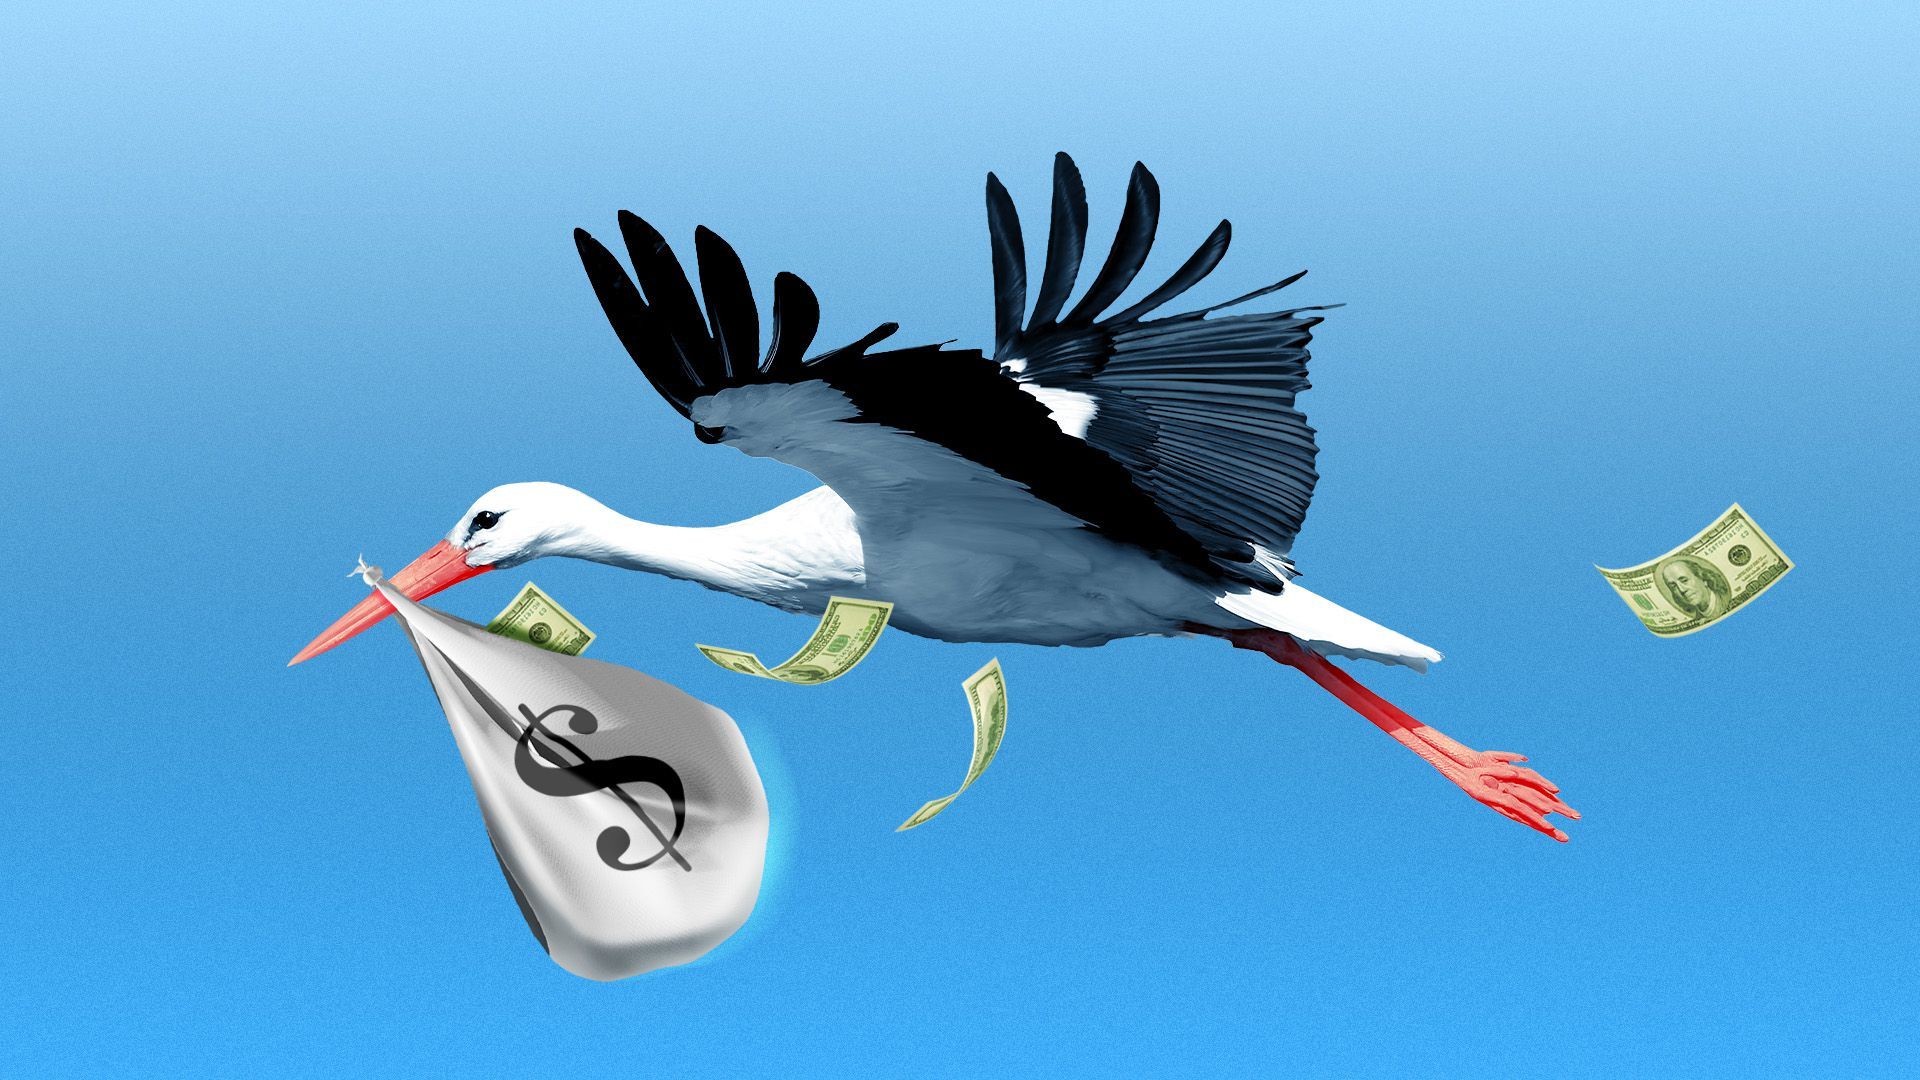 Illustration of a stork carrying a bag of money